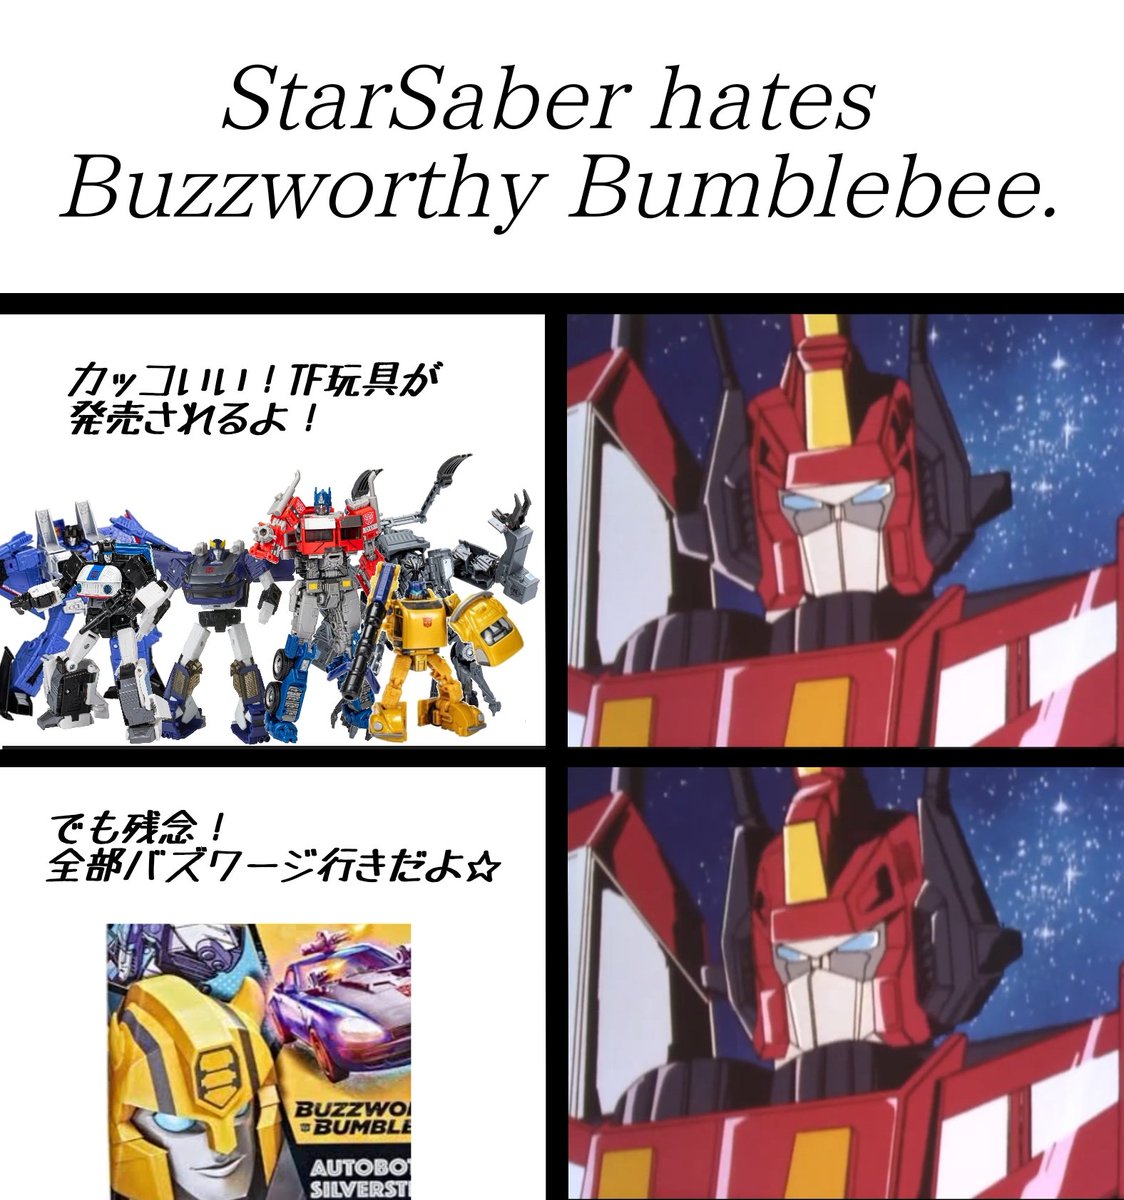 Buzzworthy Bumblebee from a Japanese perspective.

日本人視点で見るバズワージバンブルビー。